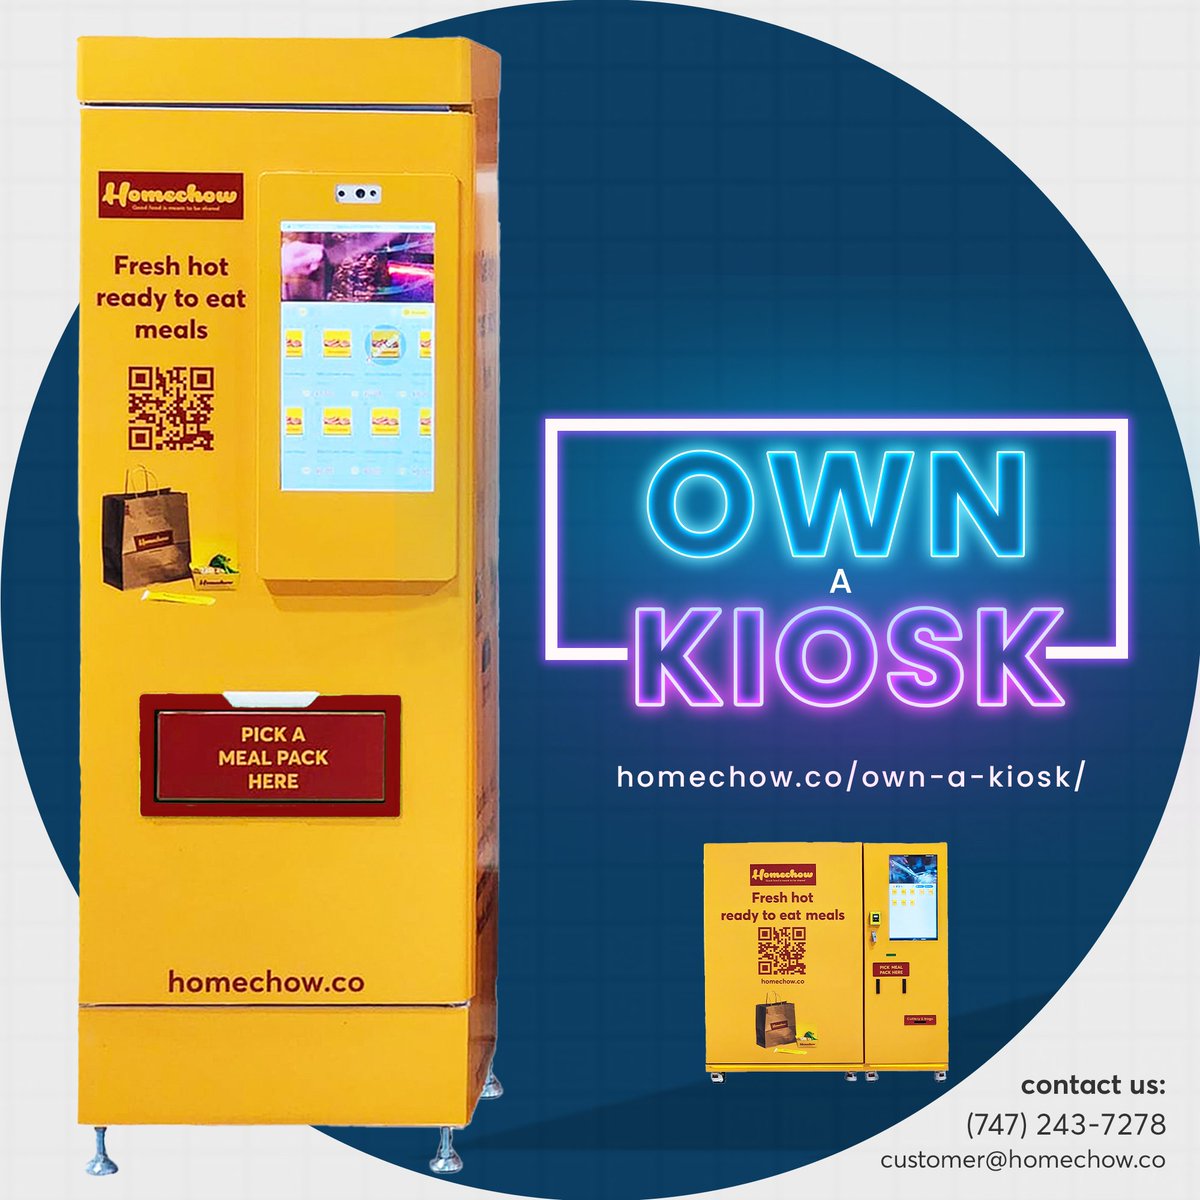 Empower your culinary dreams: Homechow's all-in-one solutions give you the freedom and flexibility of owning a food business.

Speak to us today: bit.ly/3Ut026x

#Homechow #FoodKiosks #NewYork #FranchiseOpportunity #Franchise #VendingKiosks #Gourmet #GourmetMeals